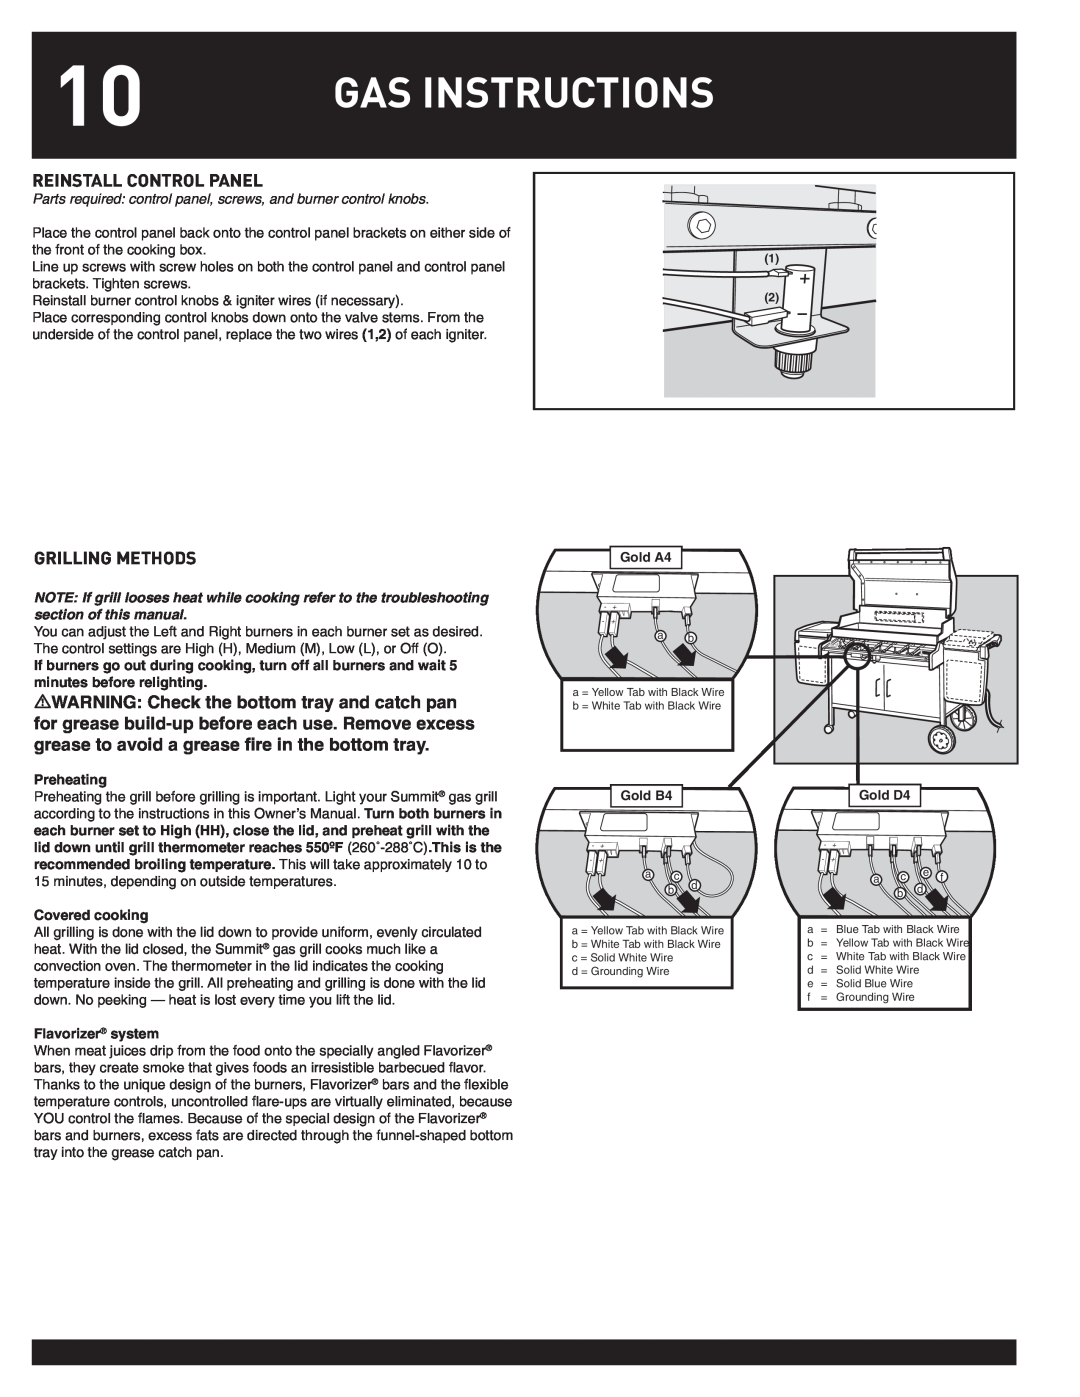 Weber SUMMIT Gas Instructions, Reinstall Control Panel, Grilling Methods, WARNING Check the bottom tray and catch pan 